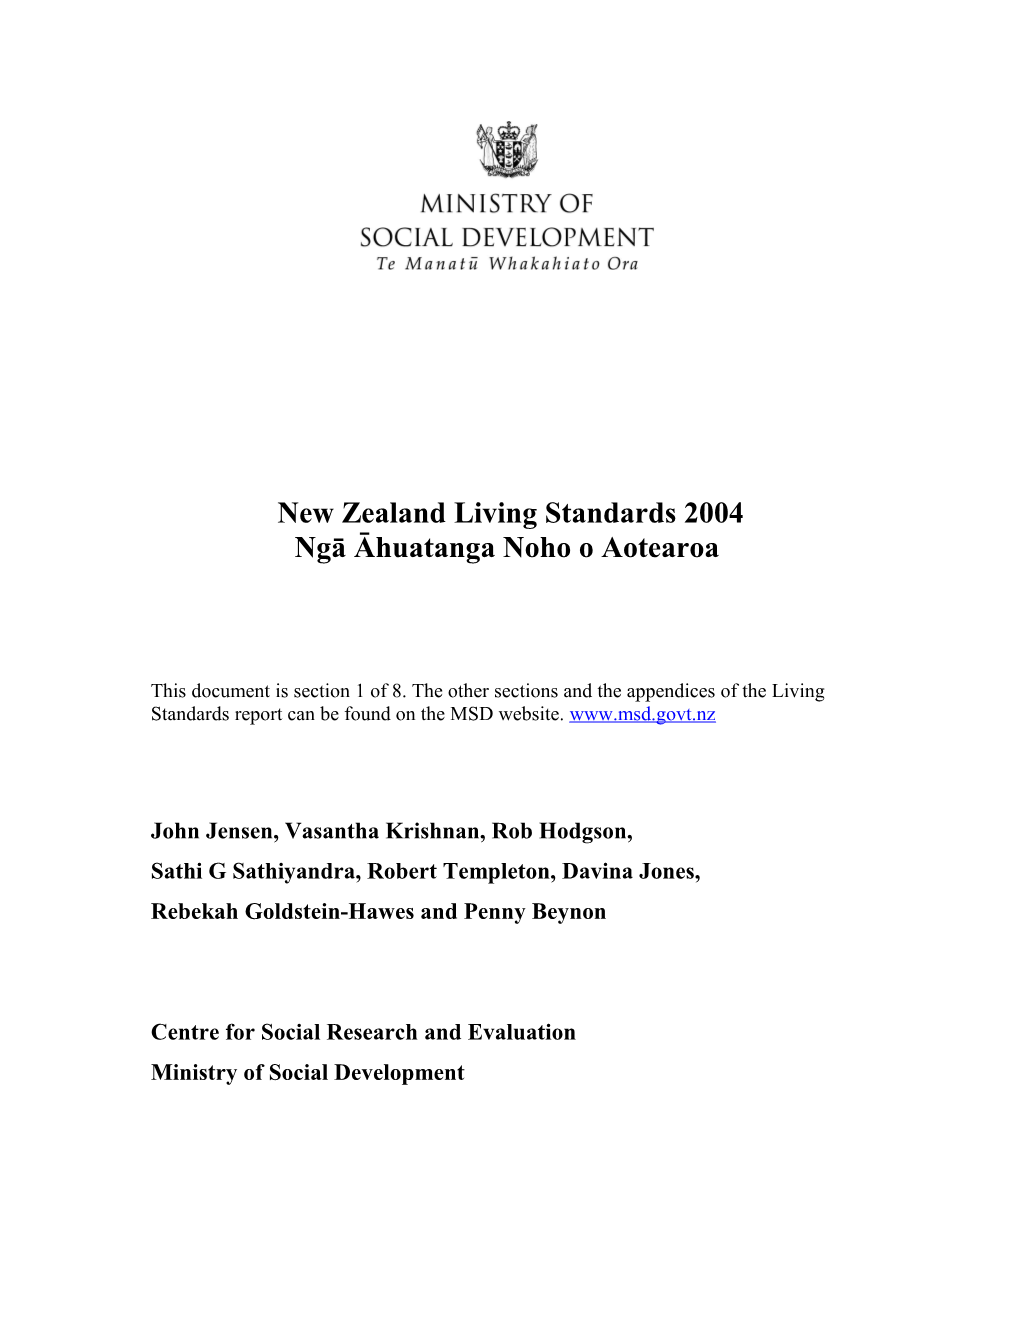 Chapter 1: Introduction and Context of NZ Living Standards